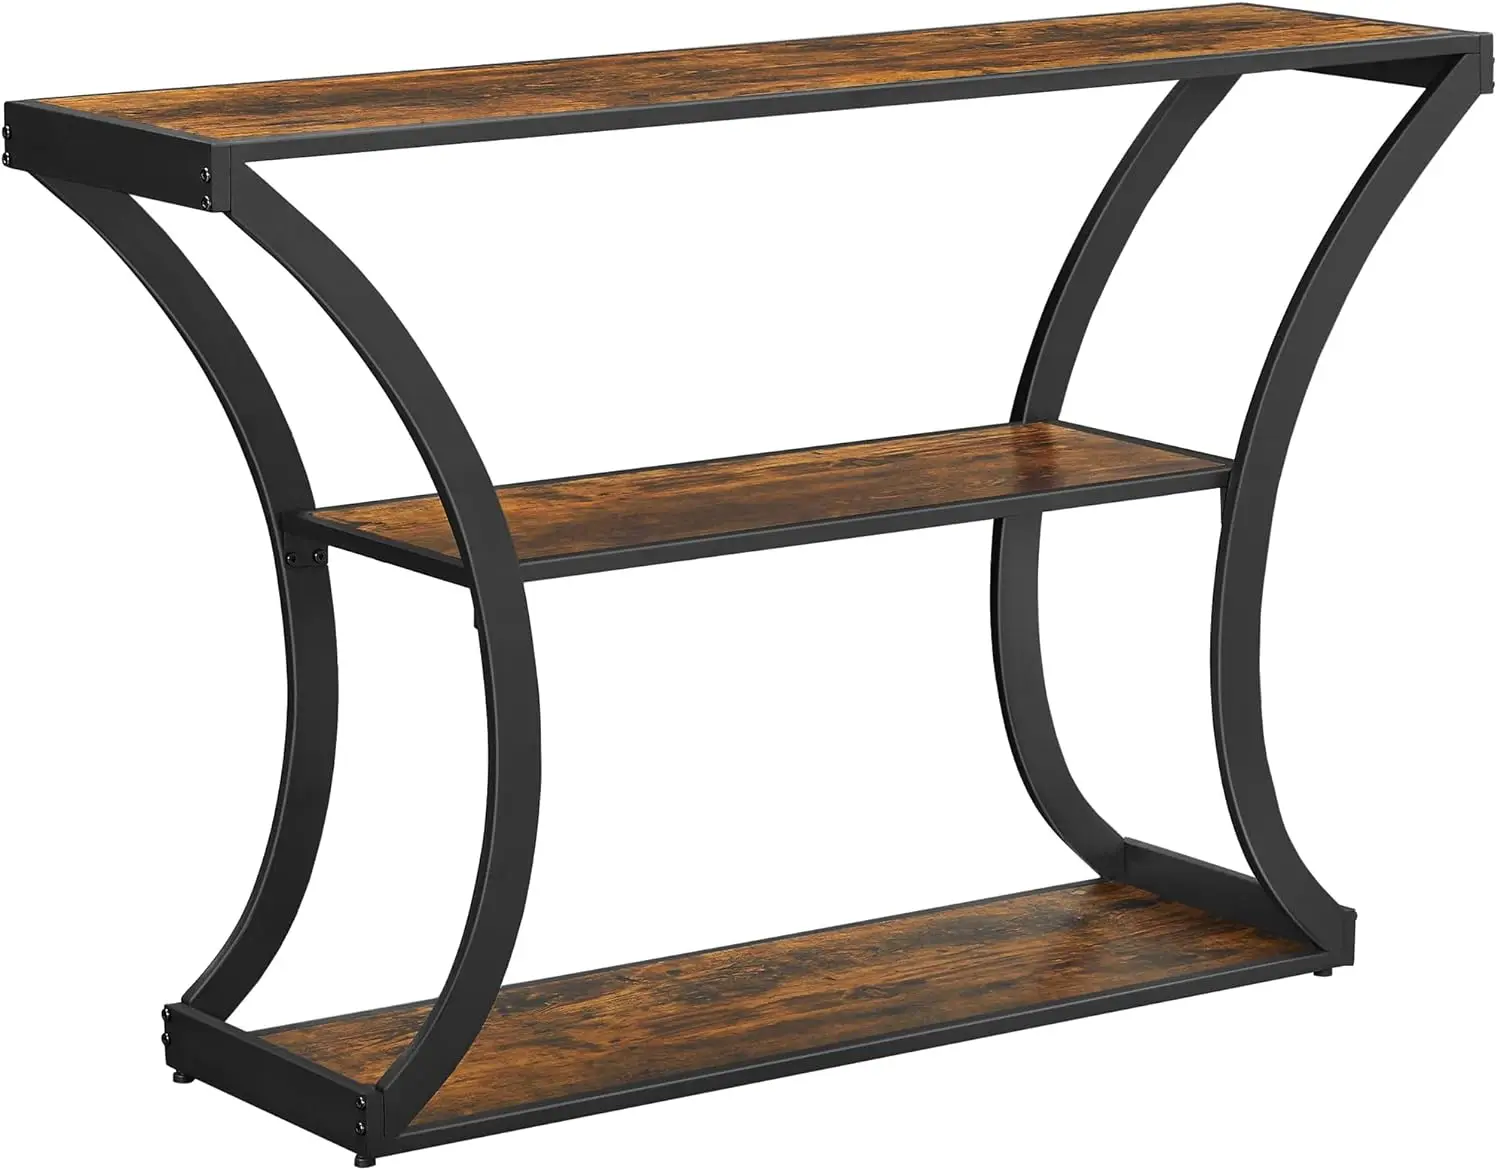 

Table with Curved Frames and 2 Open Shelves, for Hallway Entryway Living Room, Rustic Brown + Black, 11.8 X 47.2 x 31.5 Inches S